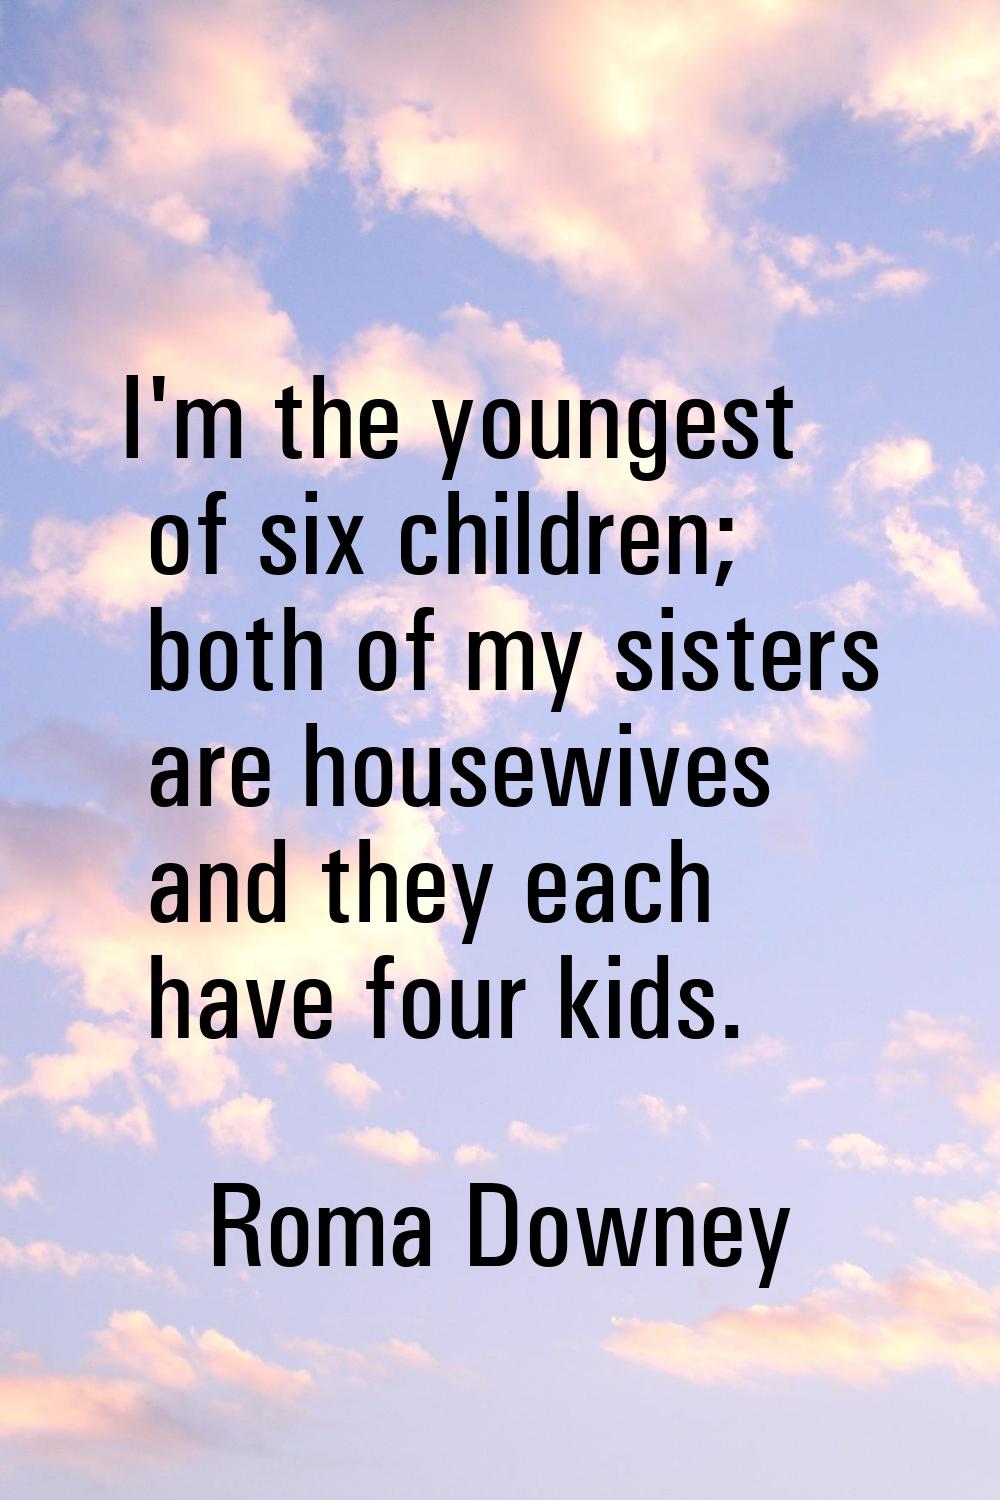 I'm the youngest of six children; both of my sisters are housewives and they each have four kids.